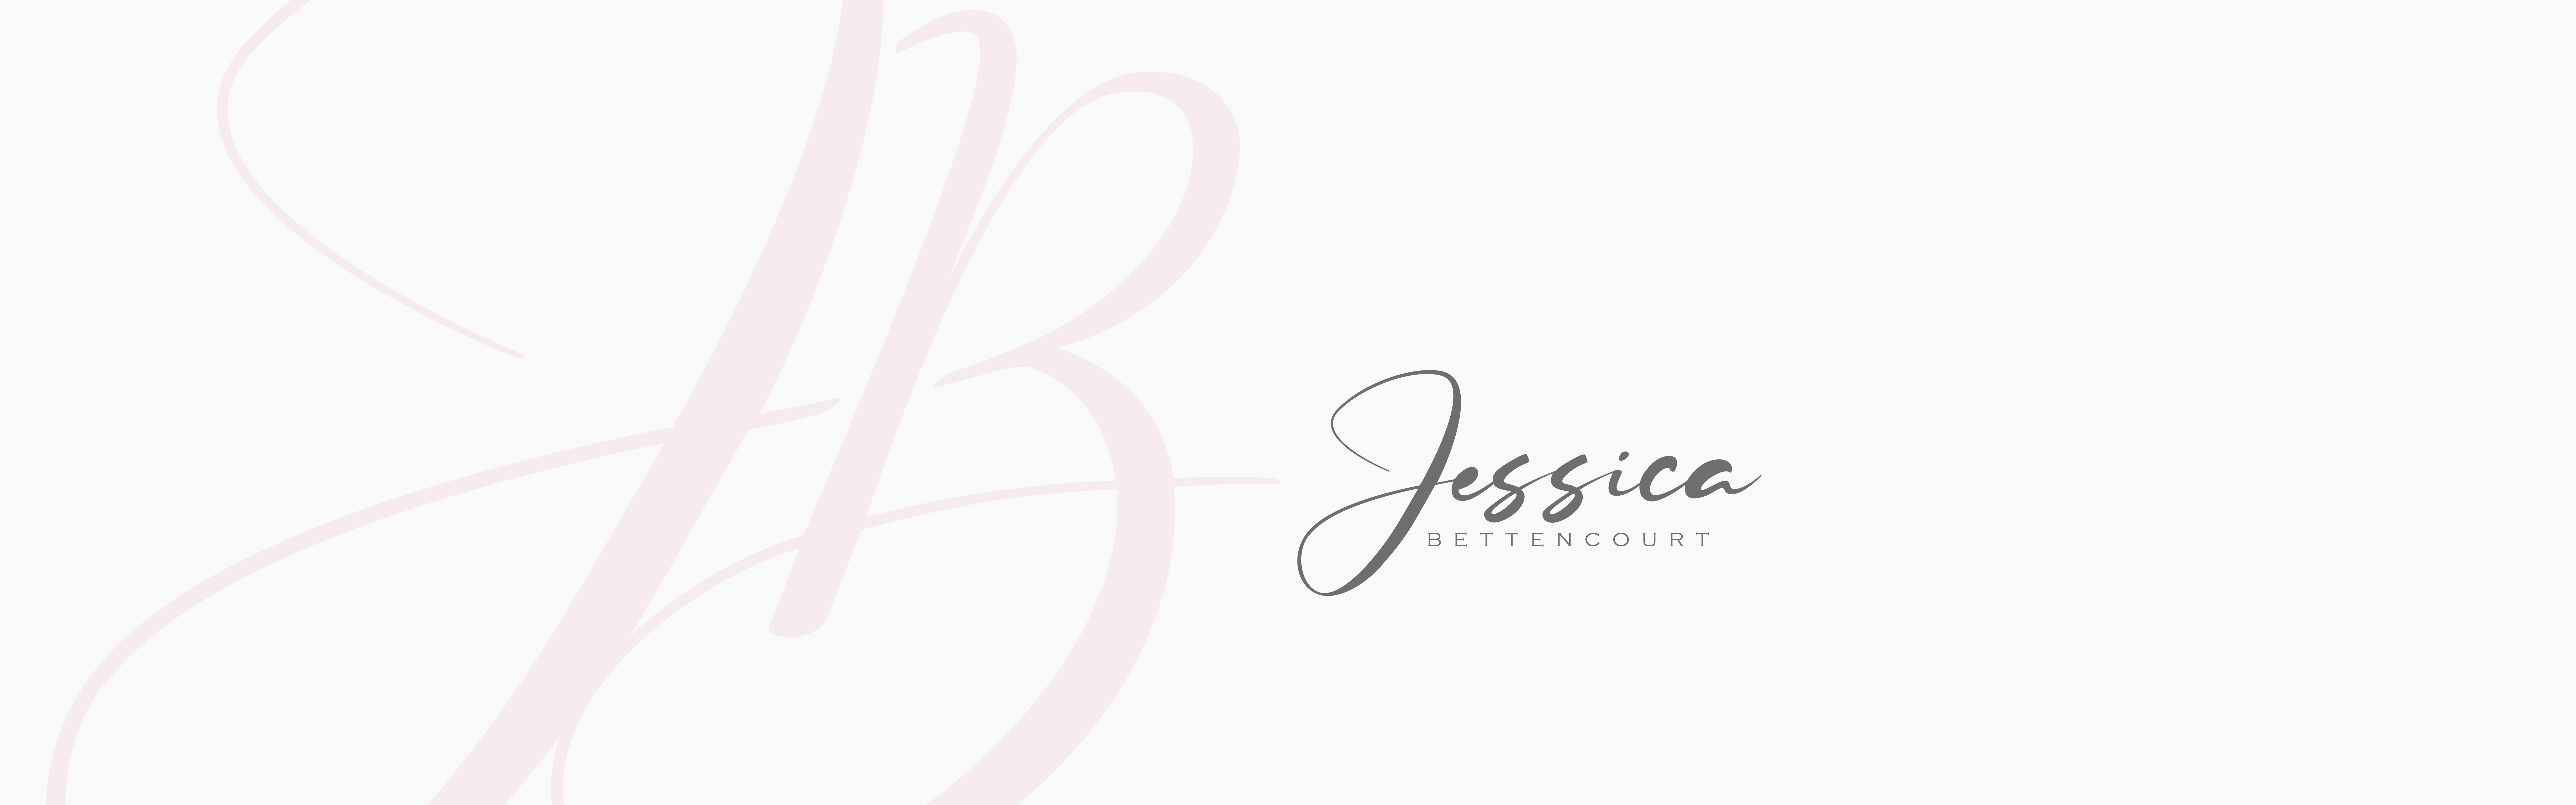 A minimalist personal branding image featuring an elegant handwritten-style logo with the name "Jessica Bettencourt" on a white background with a large, abstract light pink graphic element.